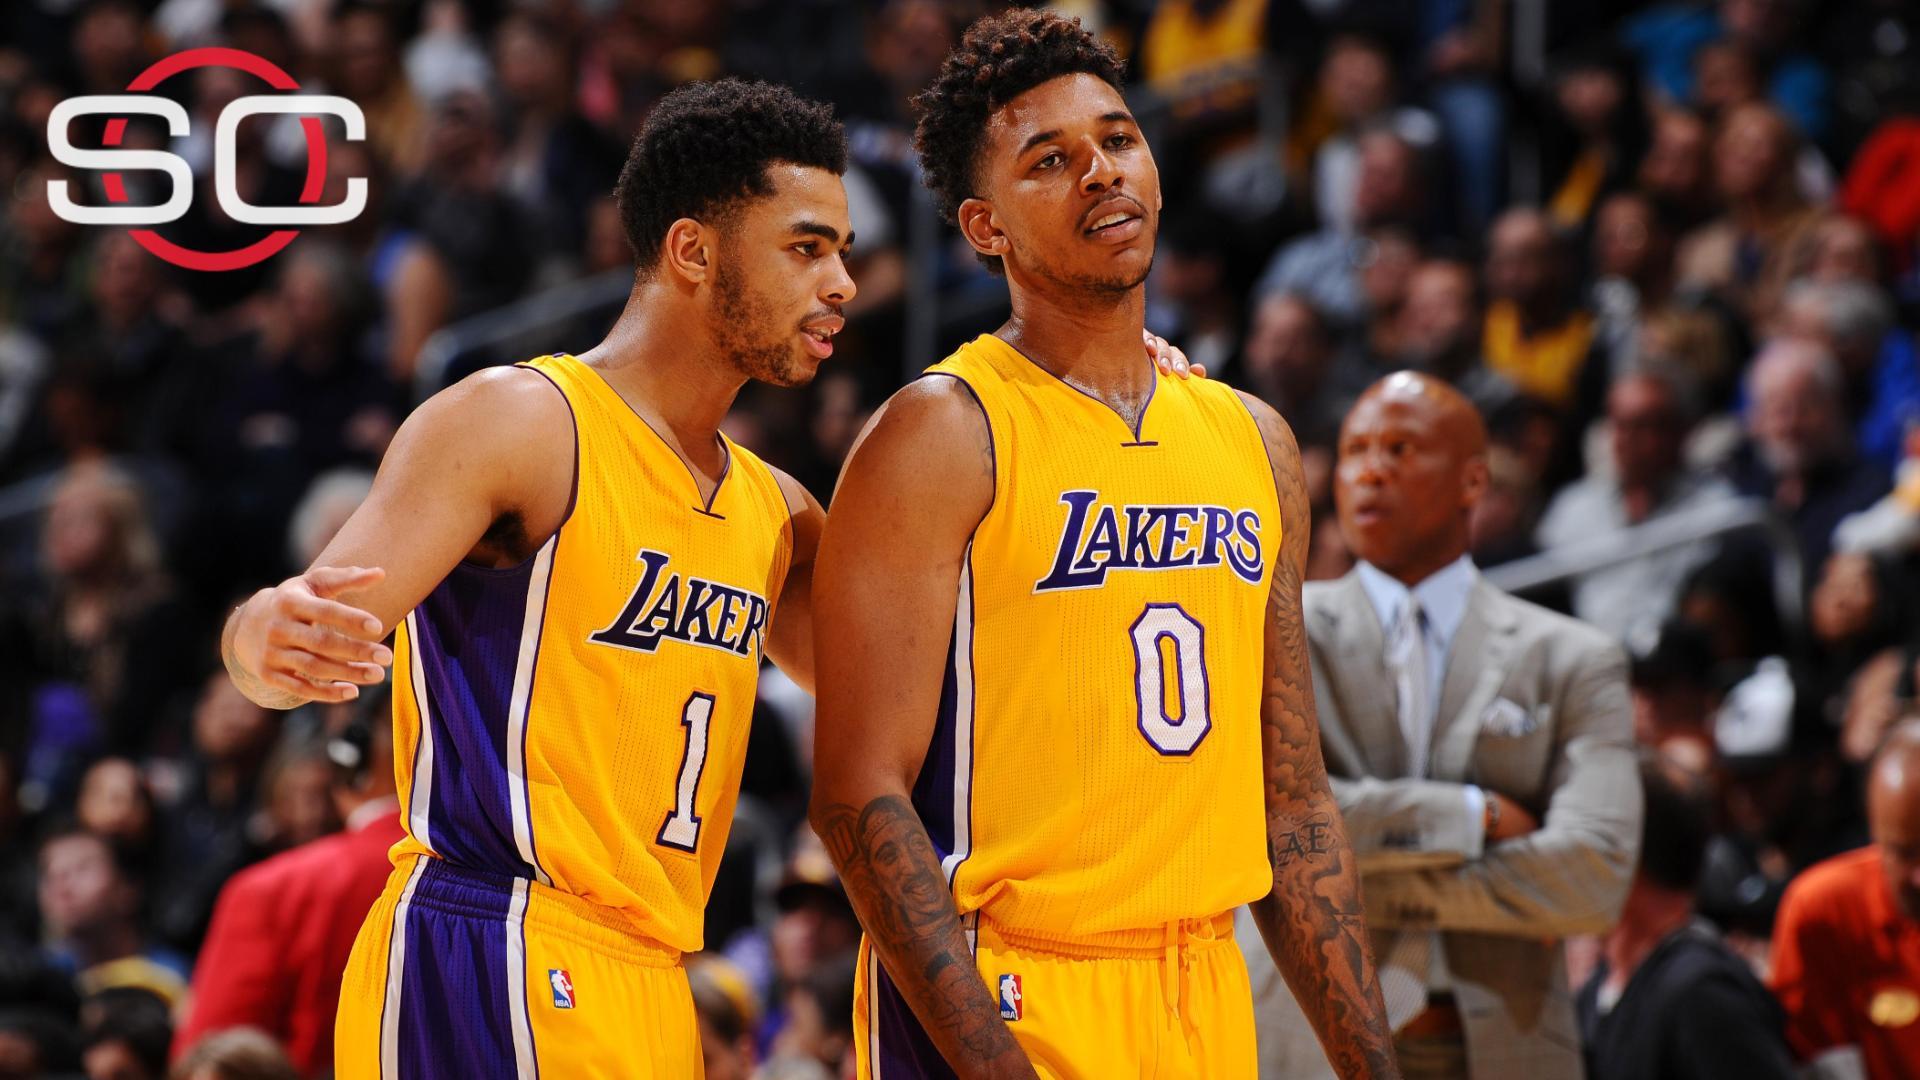 Former pros stunned at D'Angelo Russell's disregard for locker